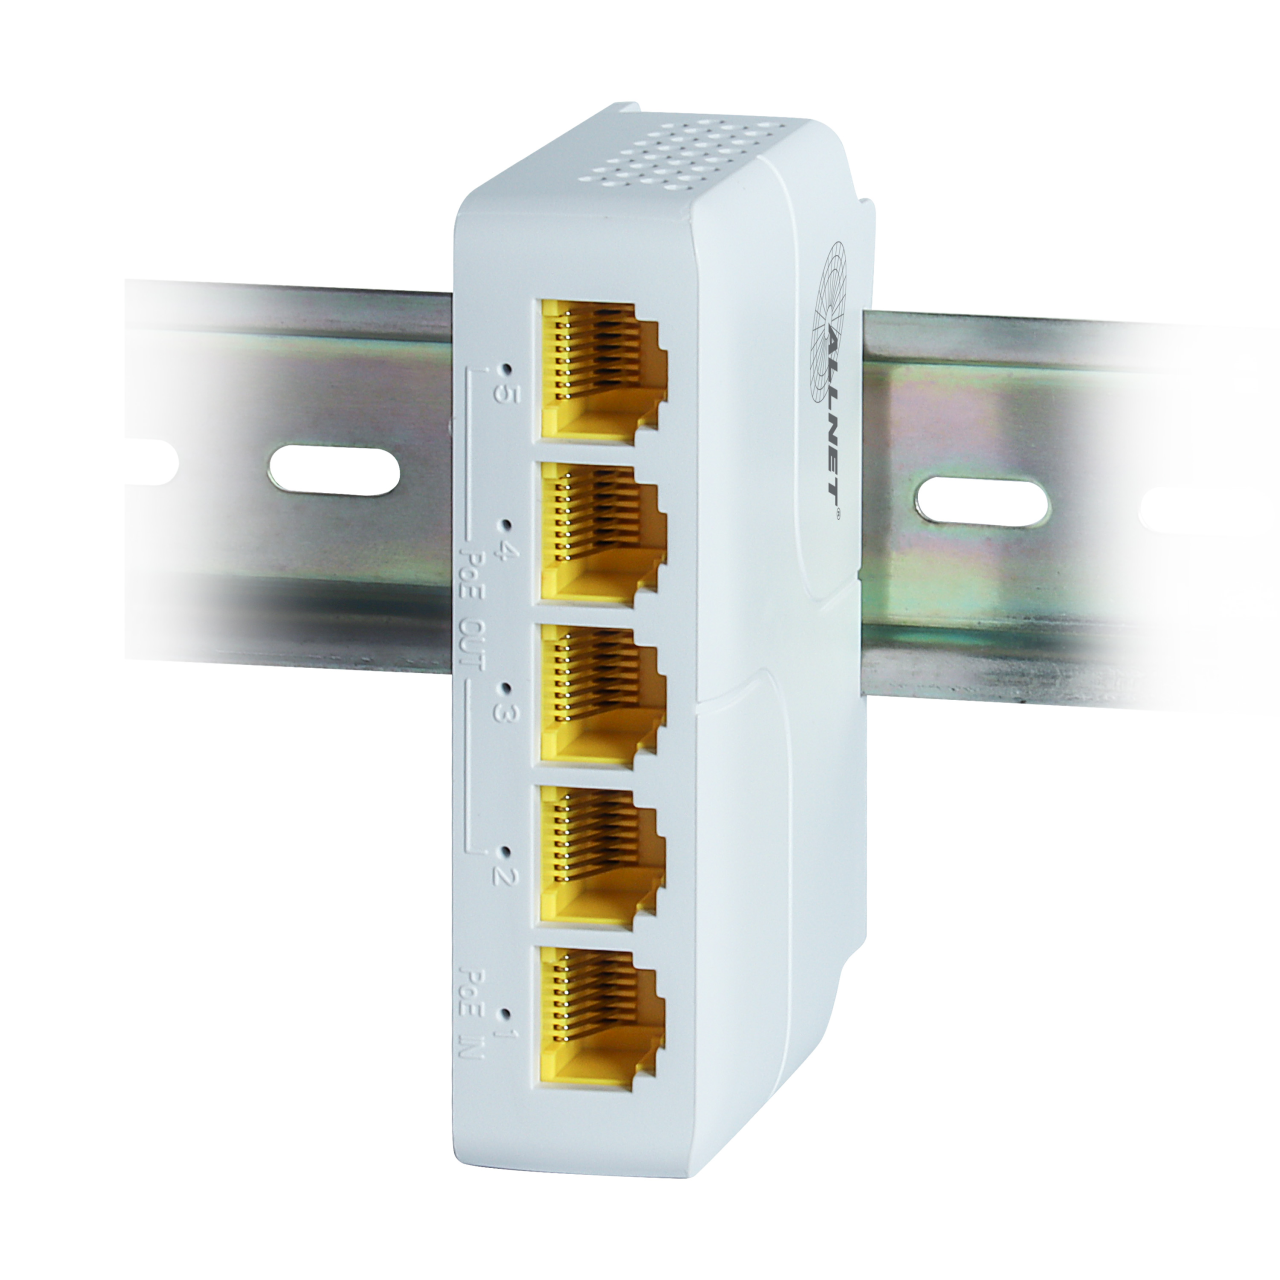 ALLNET Switch unmanaged 5 Port - 5x GbE - PoE Budget 85W - 4x PoE af/at out 1xPoE bt 90W in - Fanless, DIN, PD-Input - ALL-SG8005PD-BT90